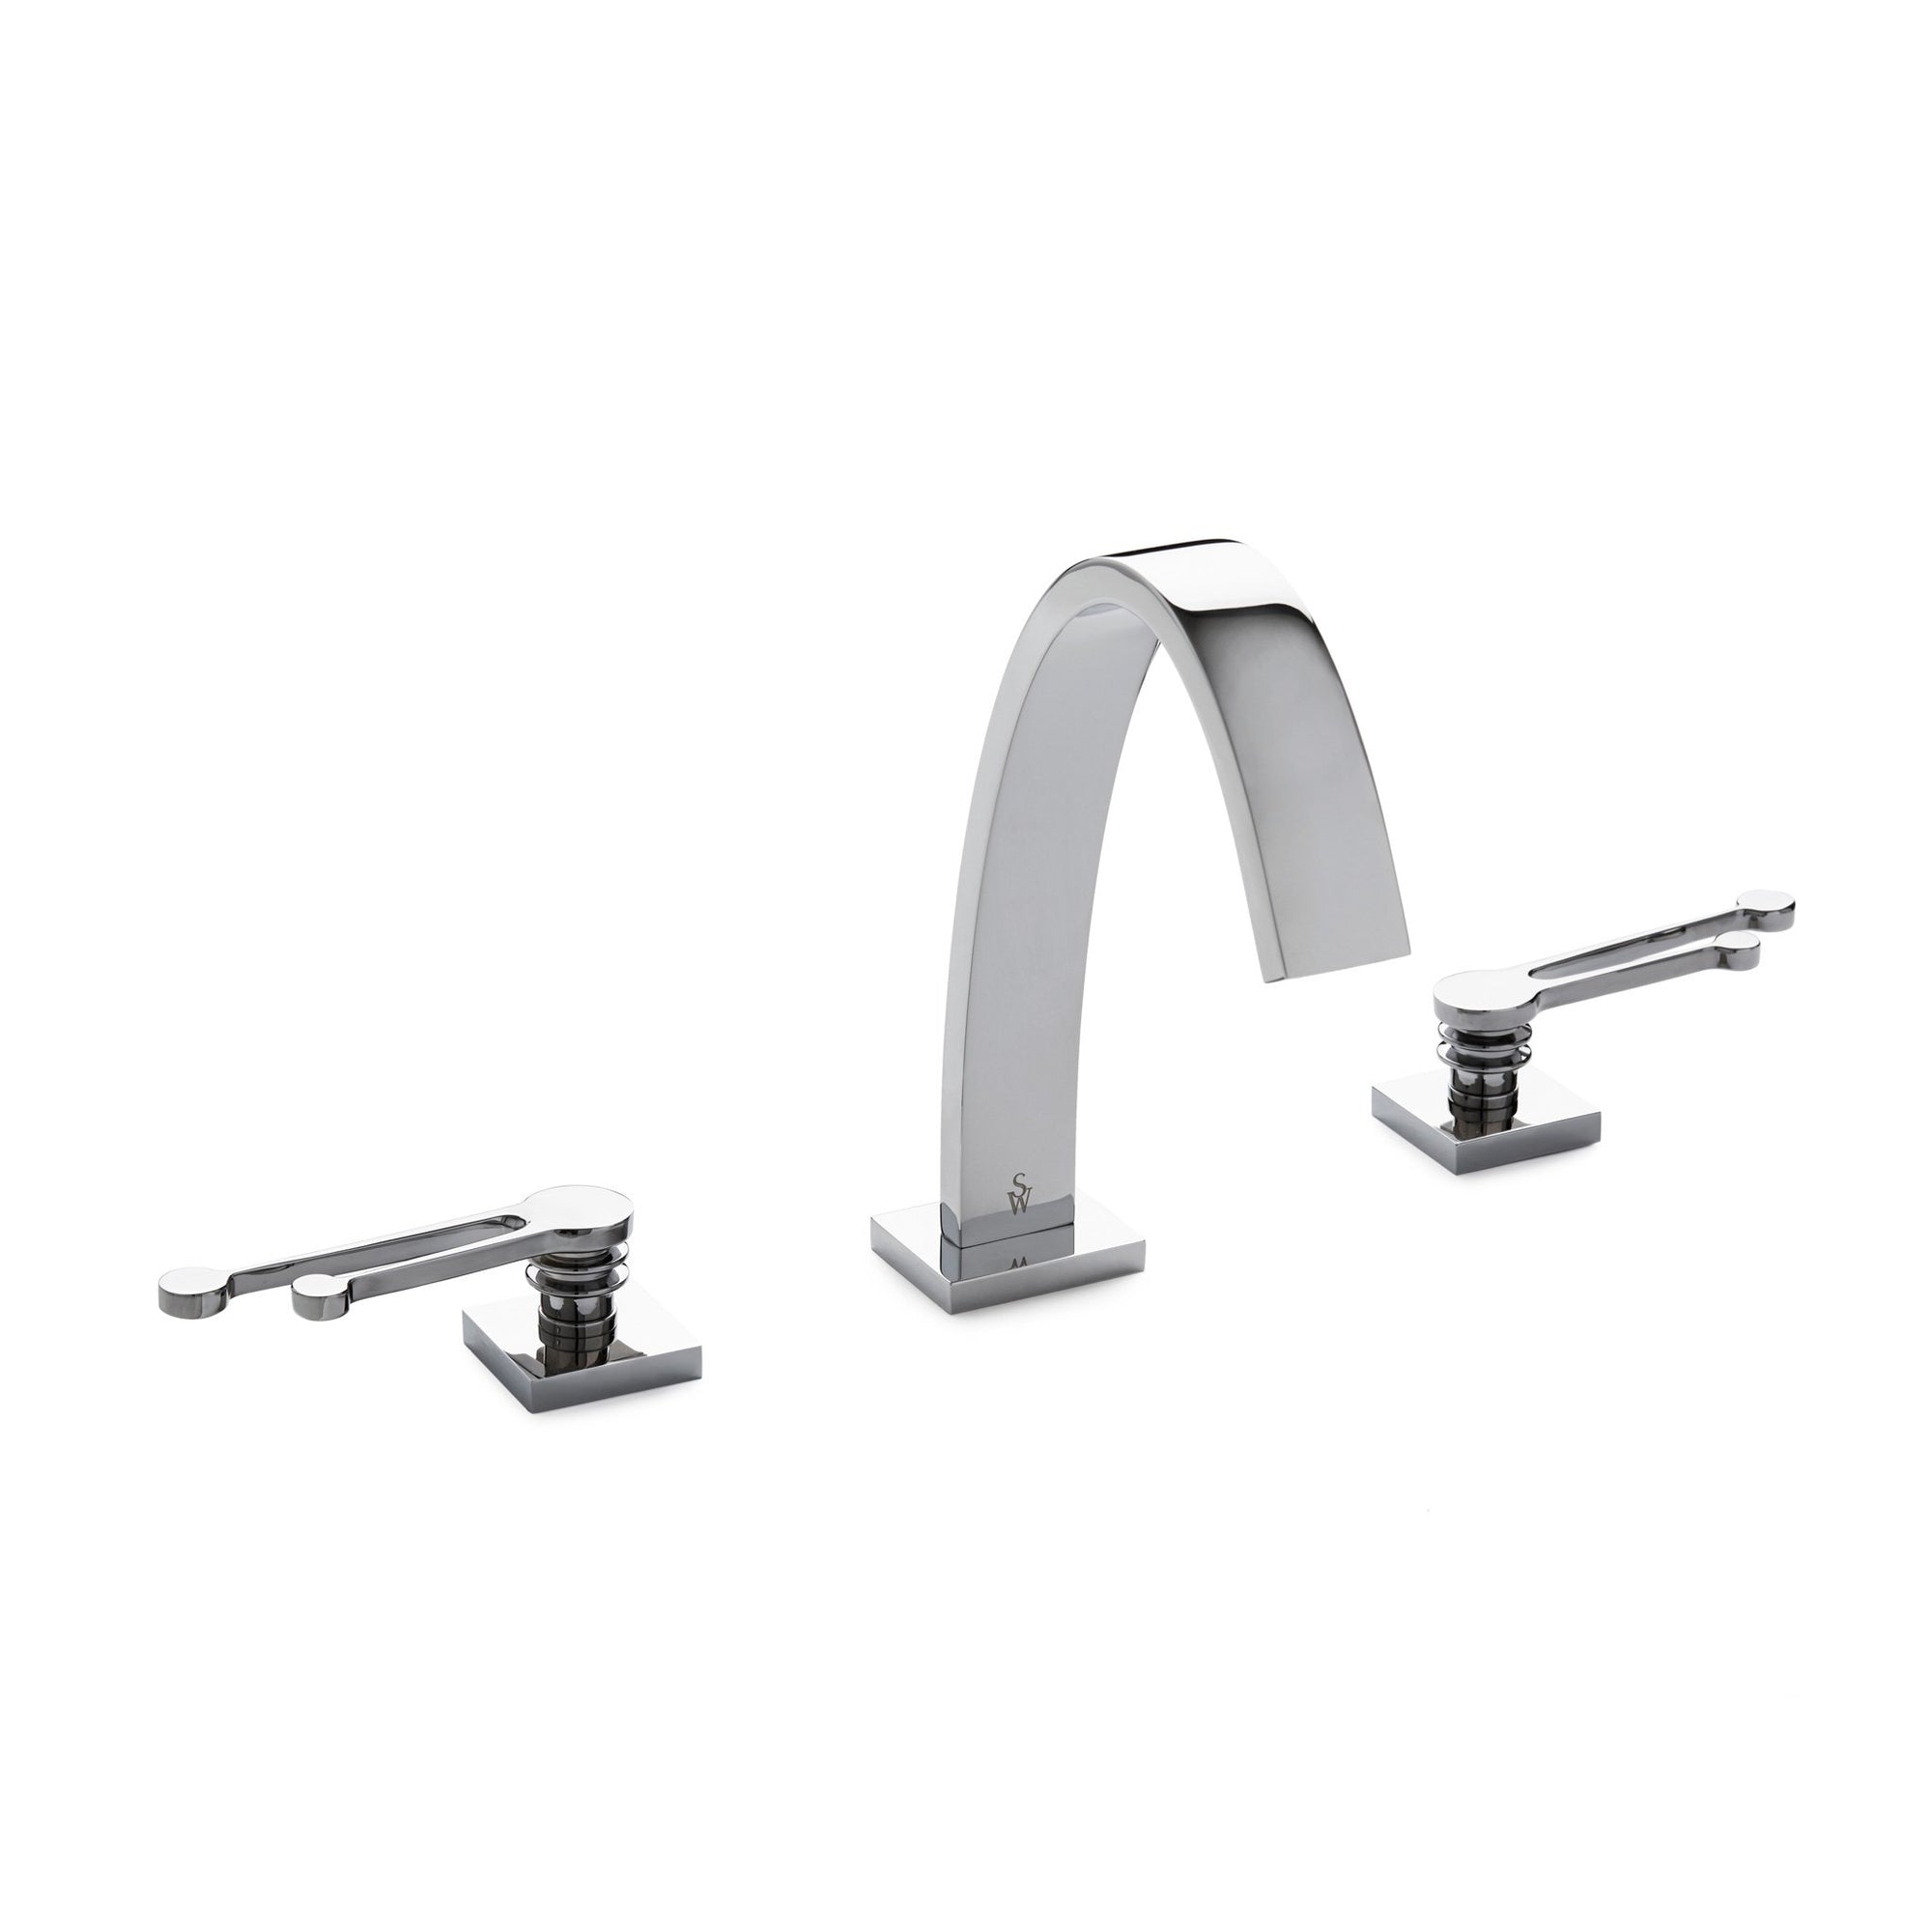 2008BSN102-CP Sherle Wagner International Aqueduct with Cosmos Lever Faucet Set in Polished Chrome metal finish